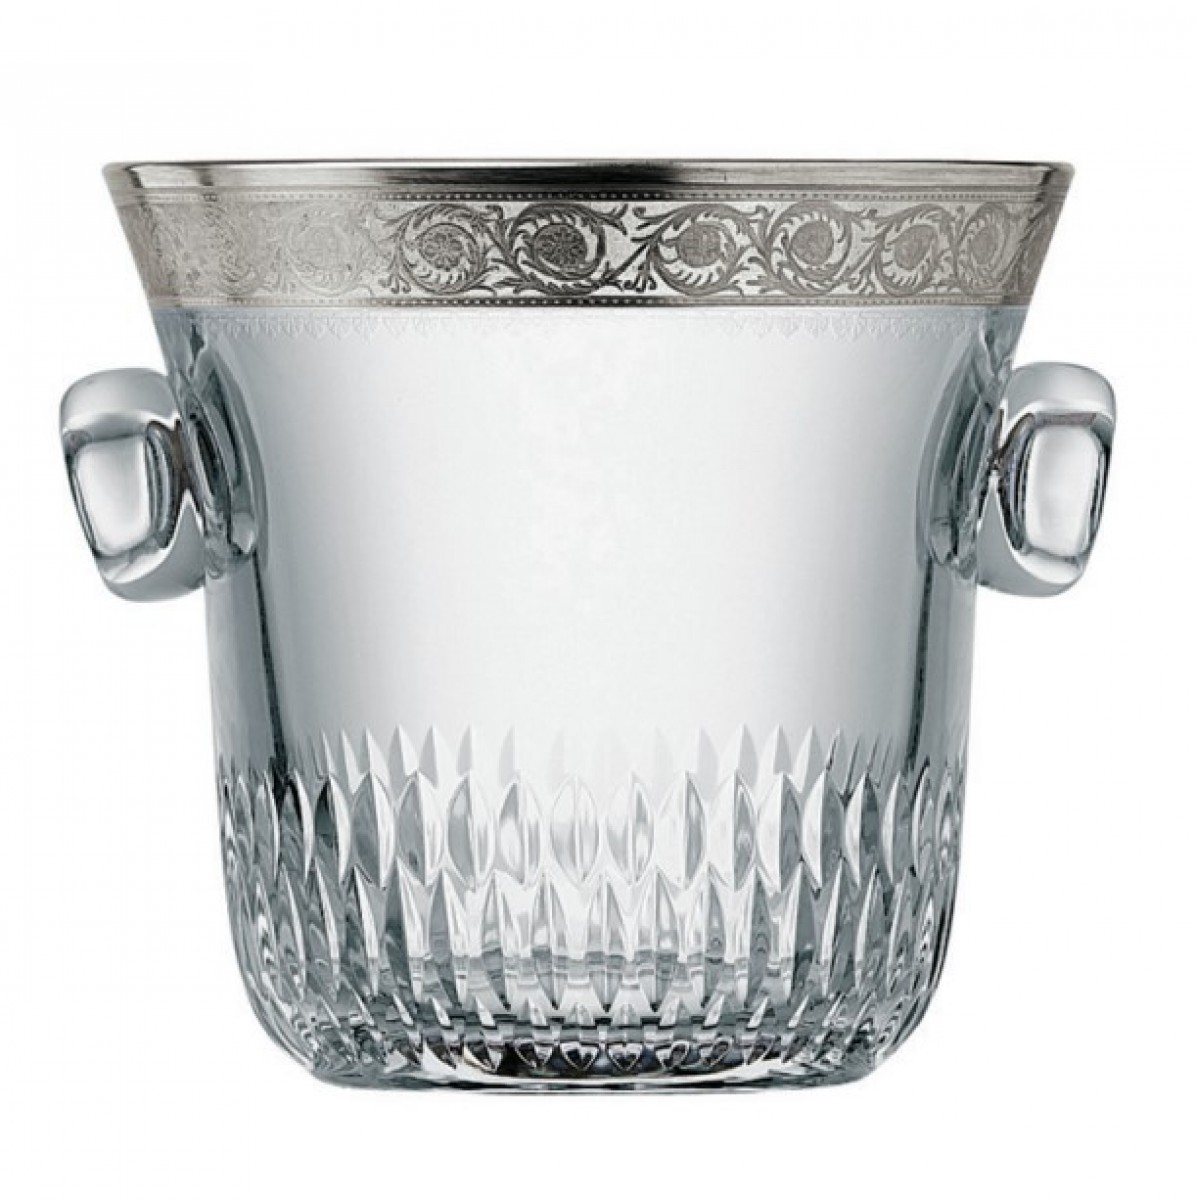 Thistle Champagne Bucket Platinum Engraving - Clear